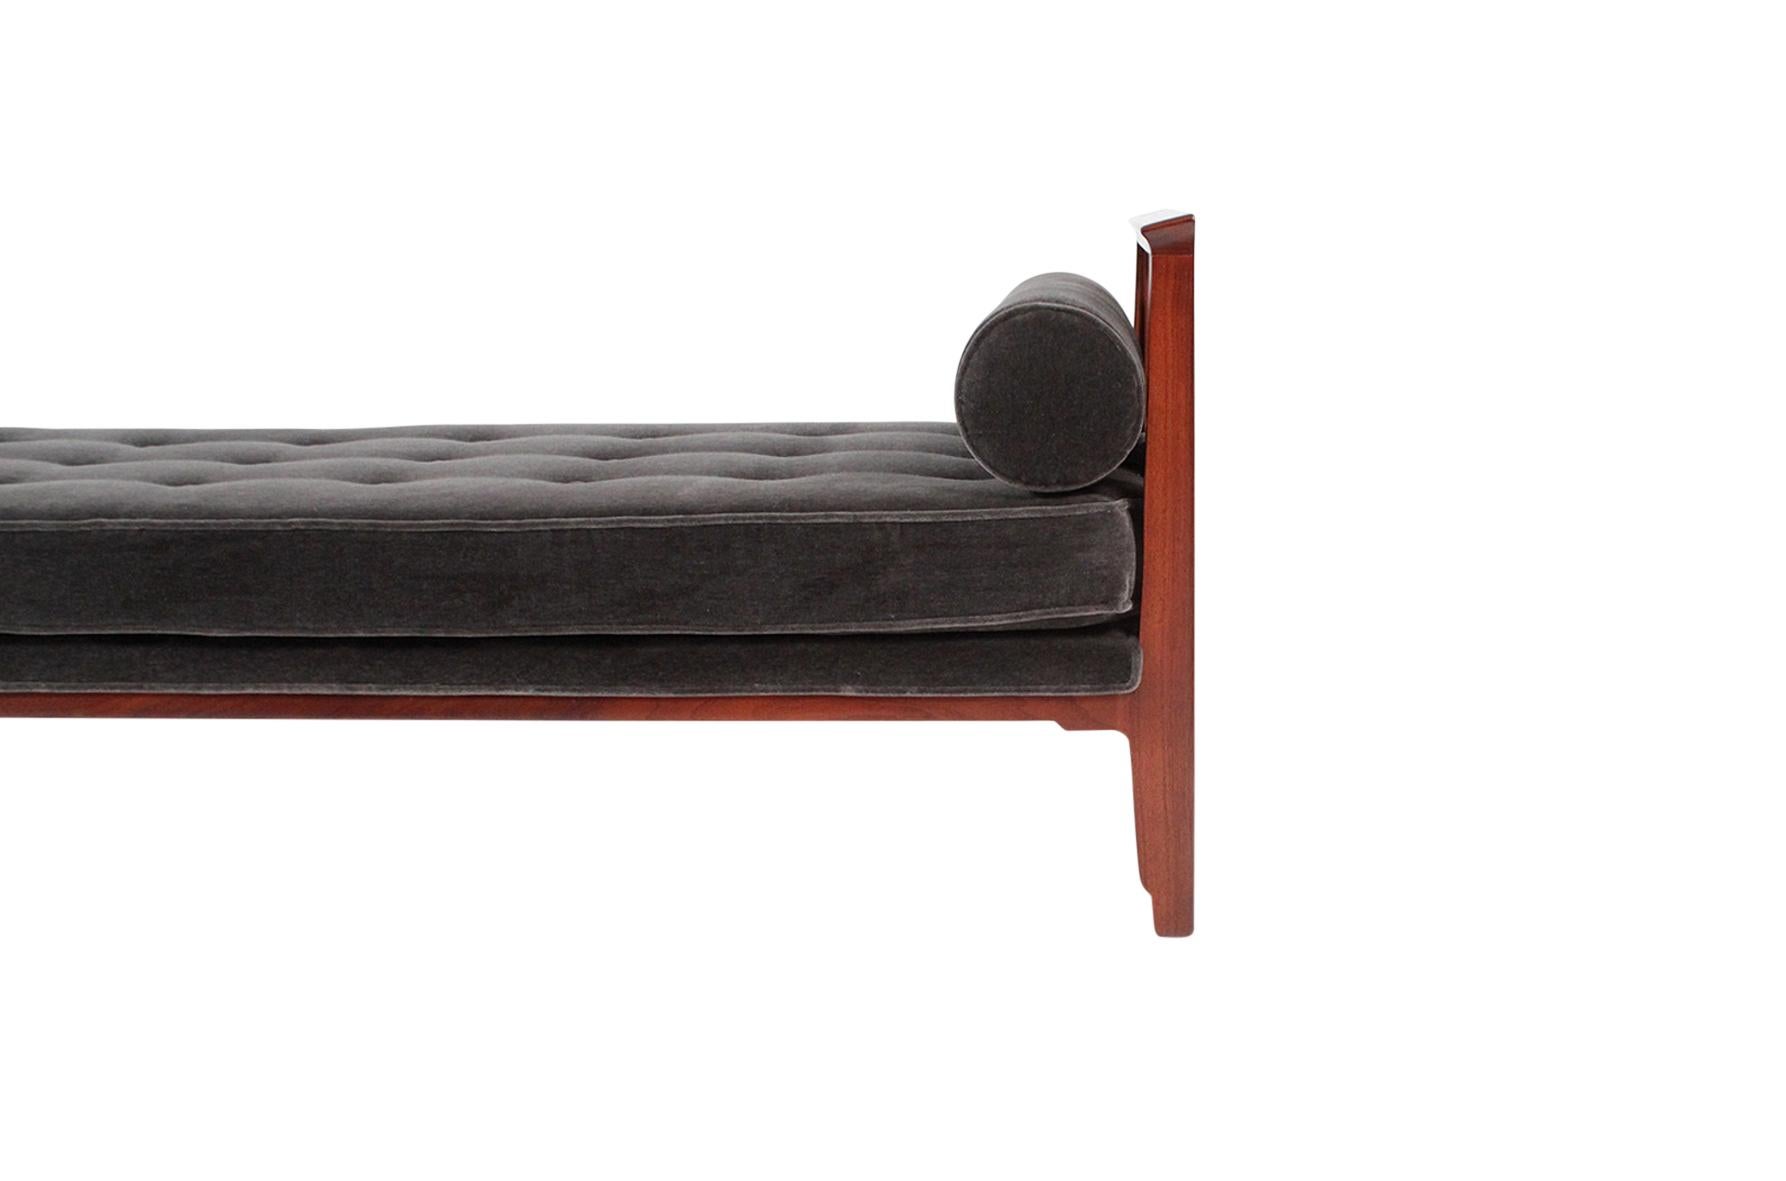 Mohair Janus Daybed by Edward Wormley for Dunbar